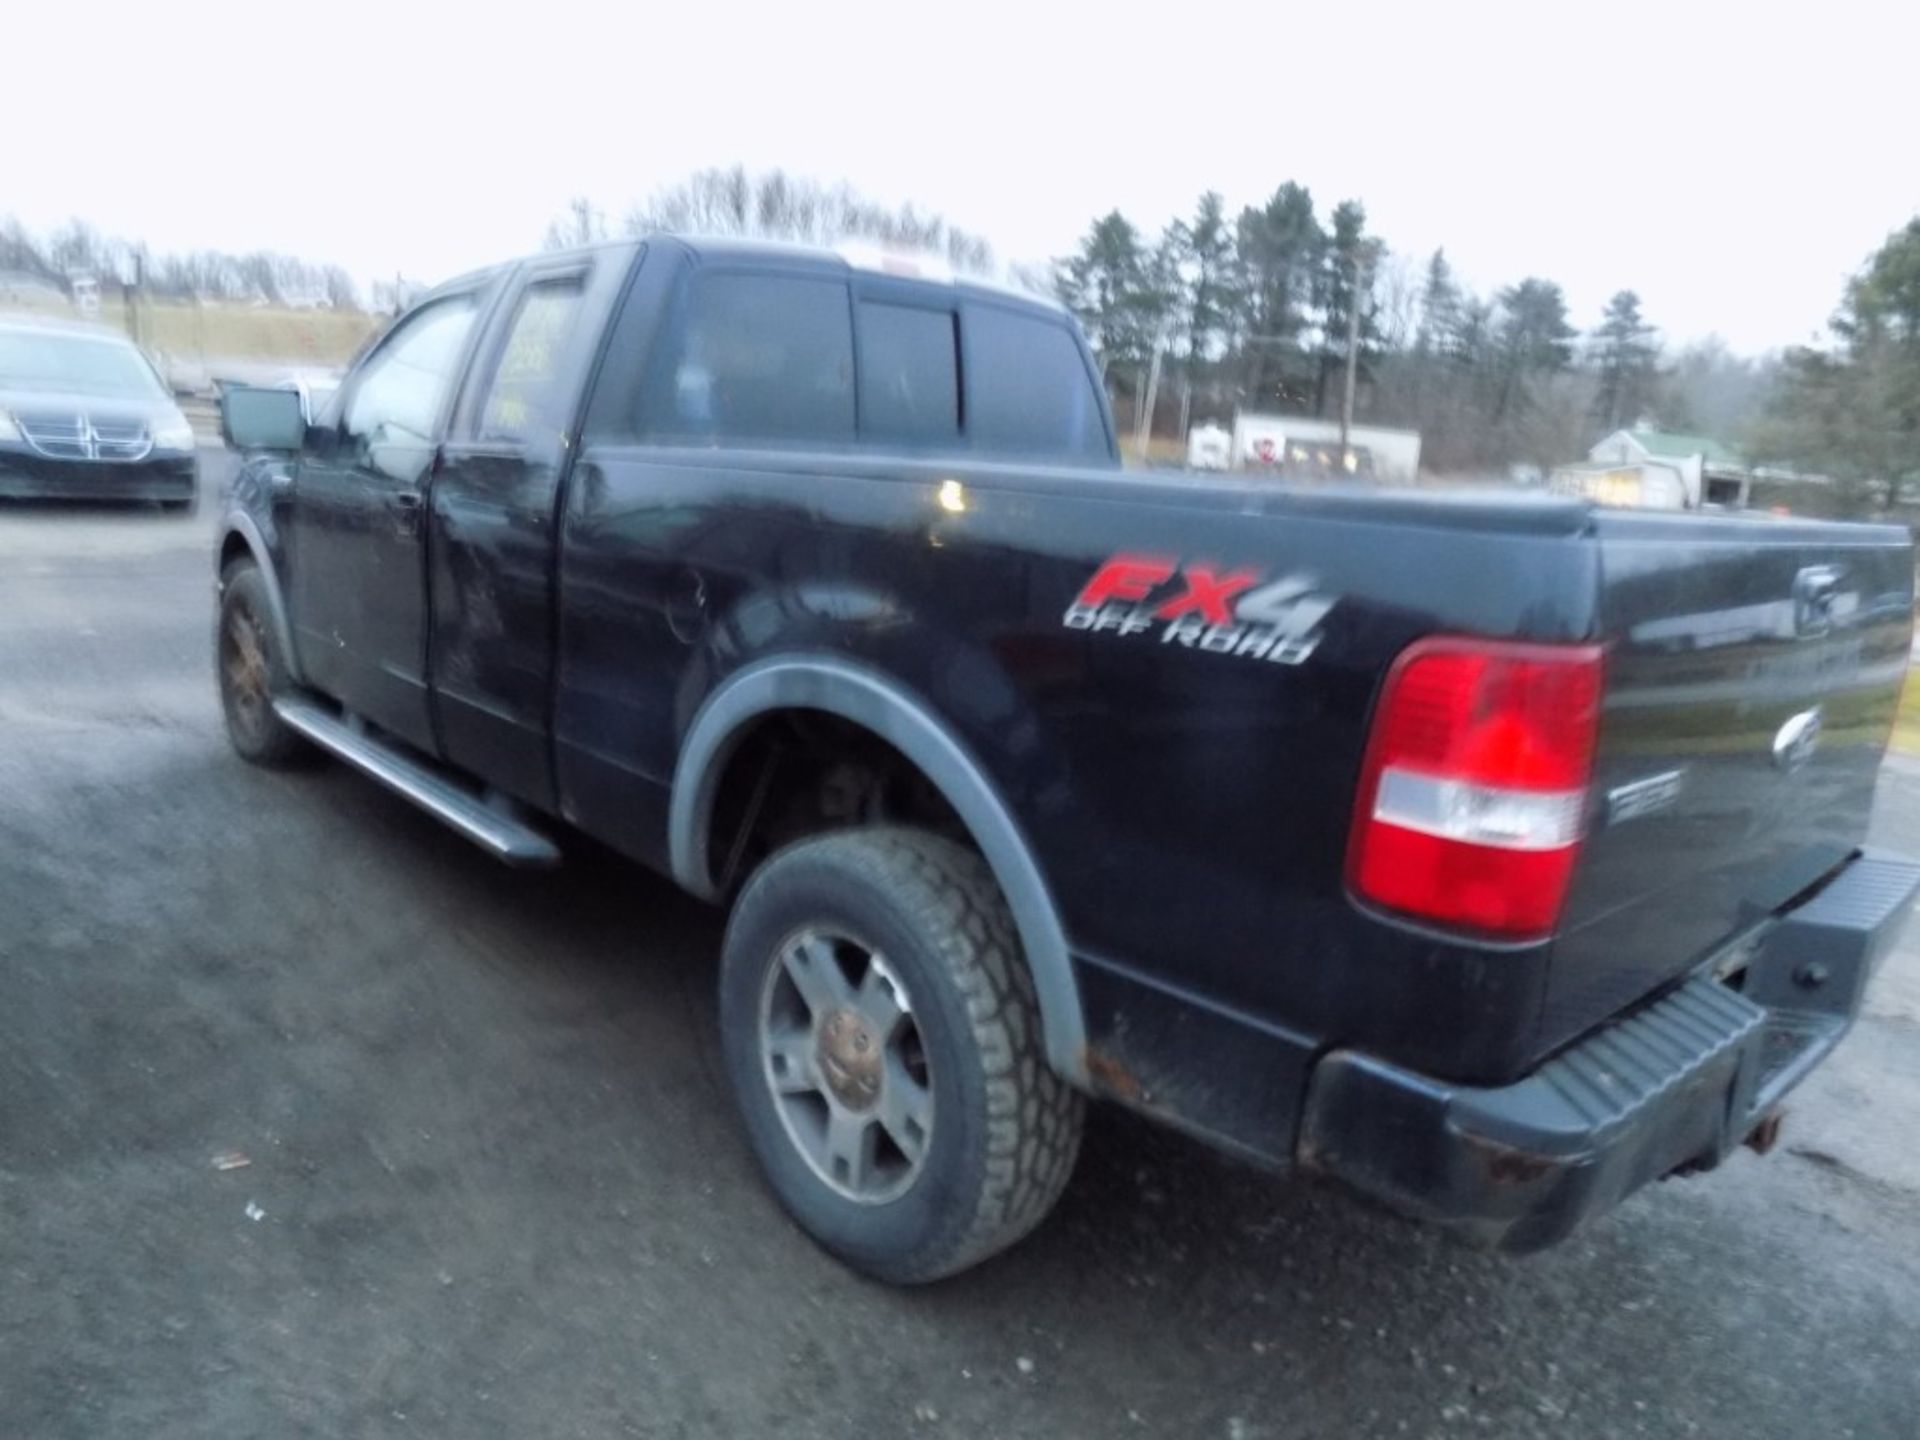 2008 Ford F150 Ext. Cab FX4, 4x4, Leather, Black, 141,861 Mi, Vin# 1FTPX14528FB94660 - OPEN TO ALL - Image 5 of 8